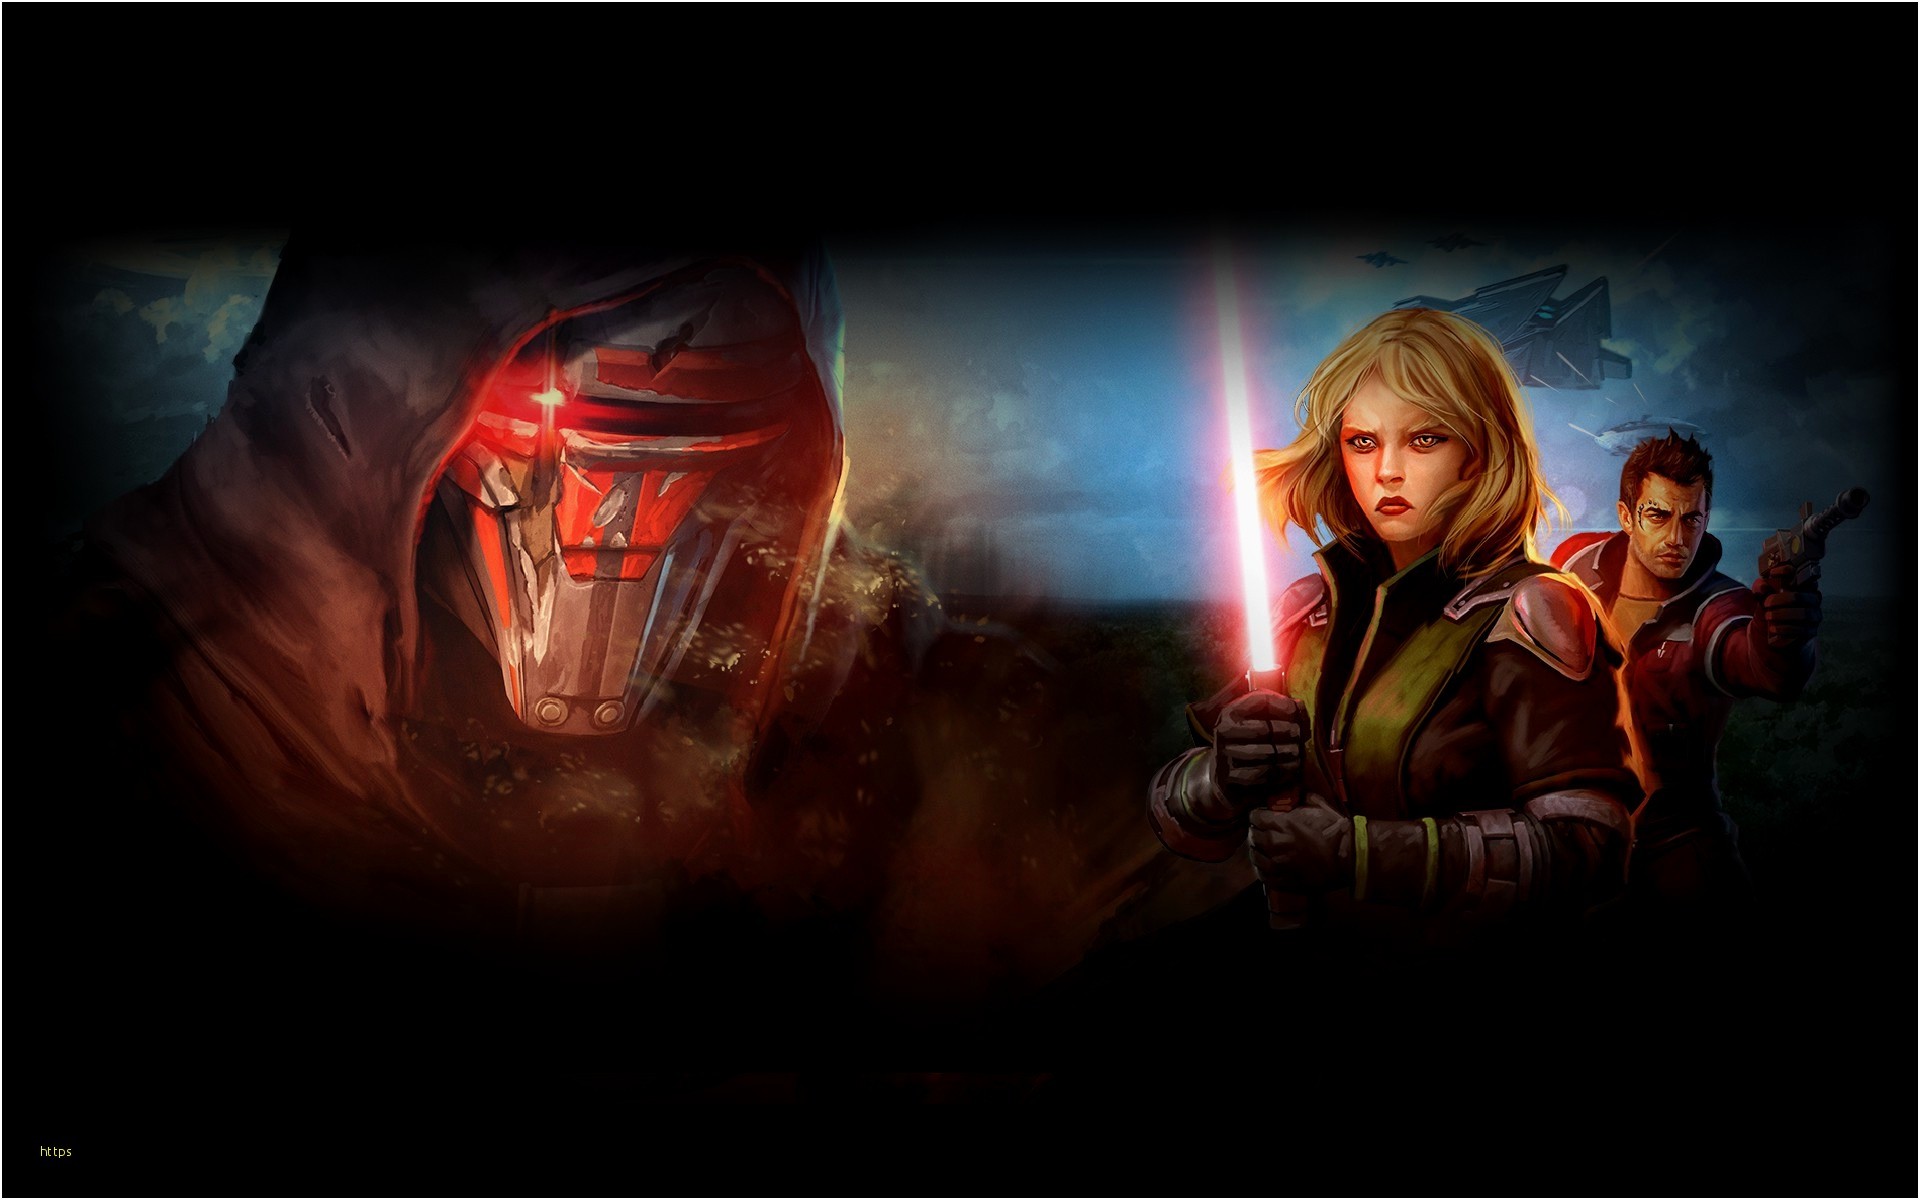 1920x1200 Swtor Wallpaper Unique Swtor Star Wars the Old Republic Video Games  Wallpapers